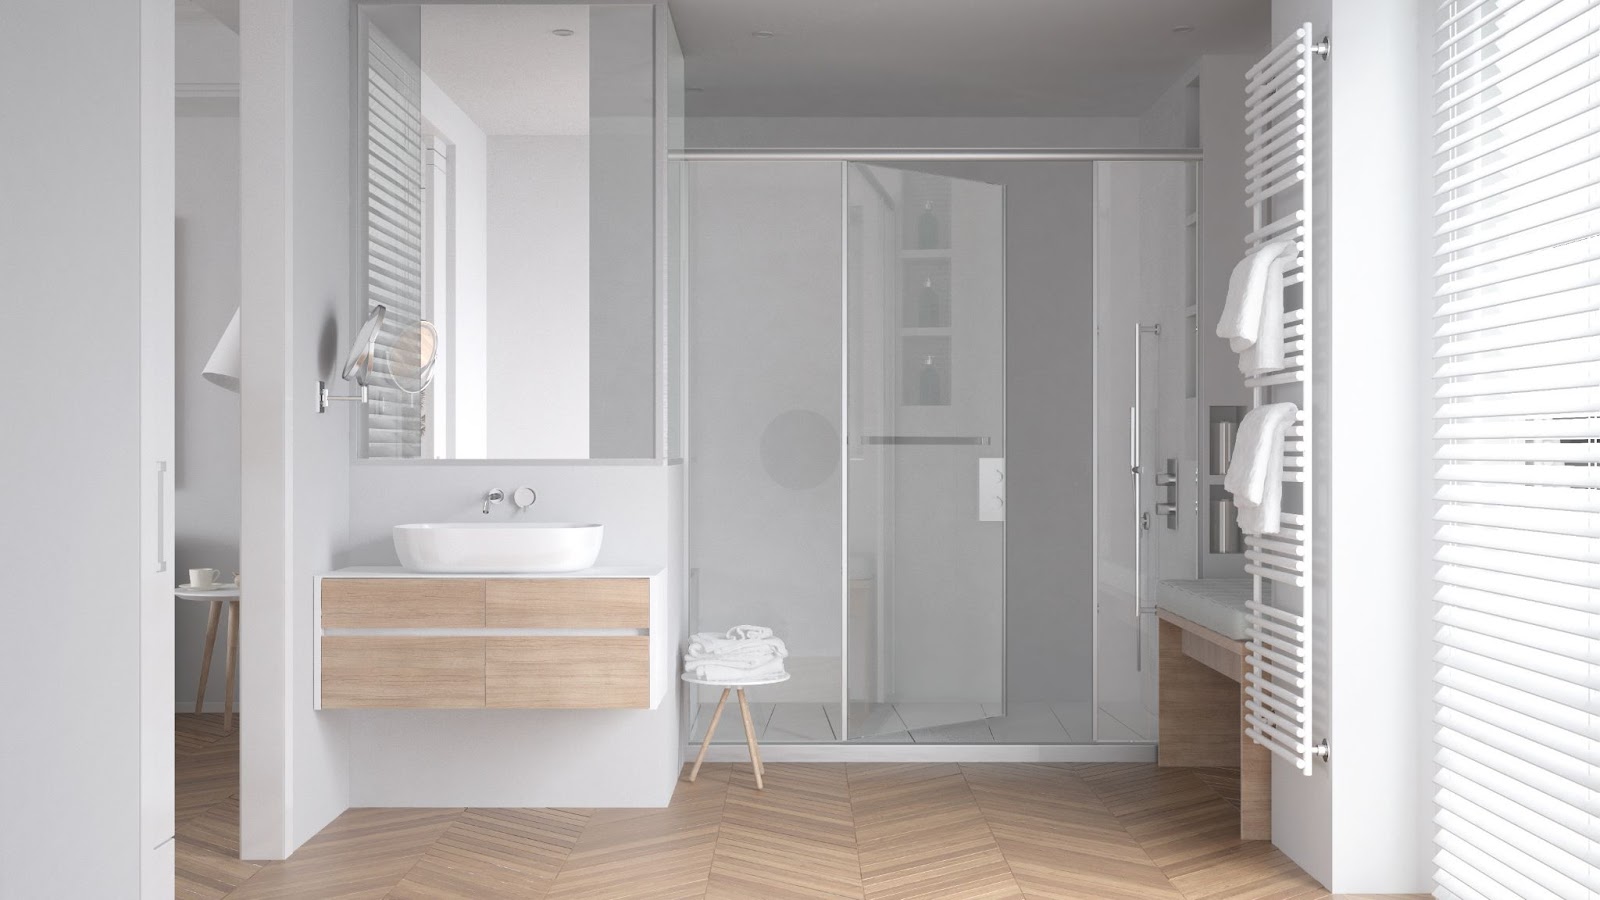 A modern bathroom with wooden floor, white walls, contemporary shower enclosure, and glass frame shower.